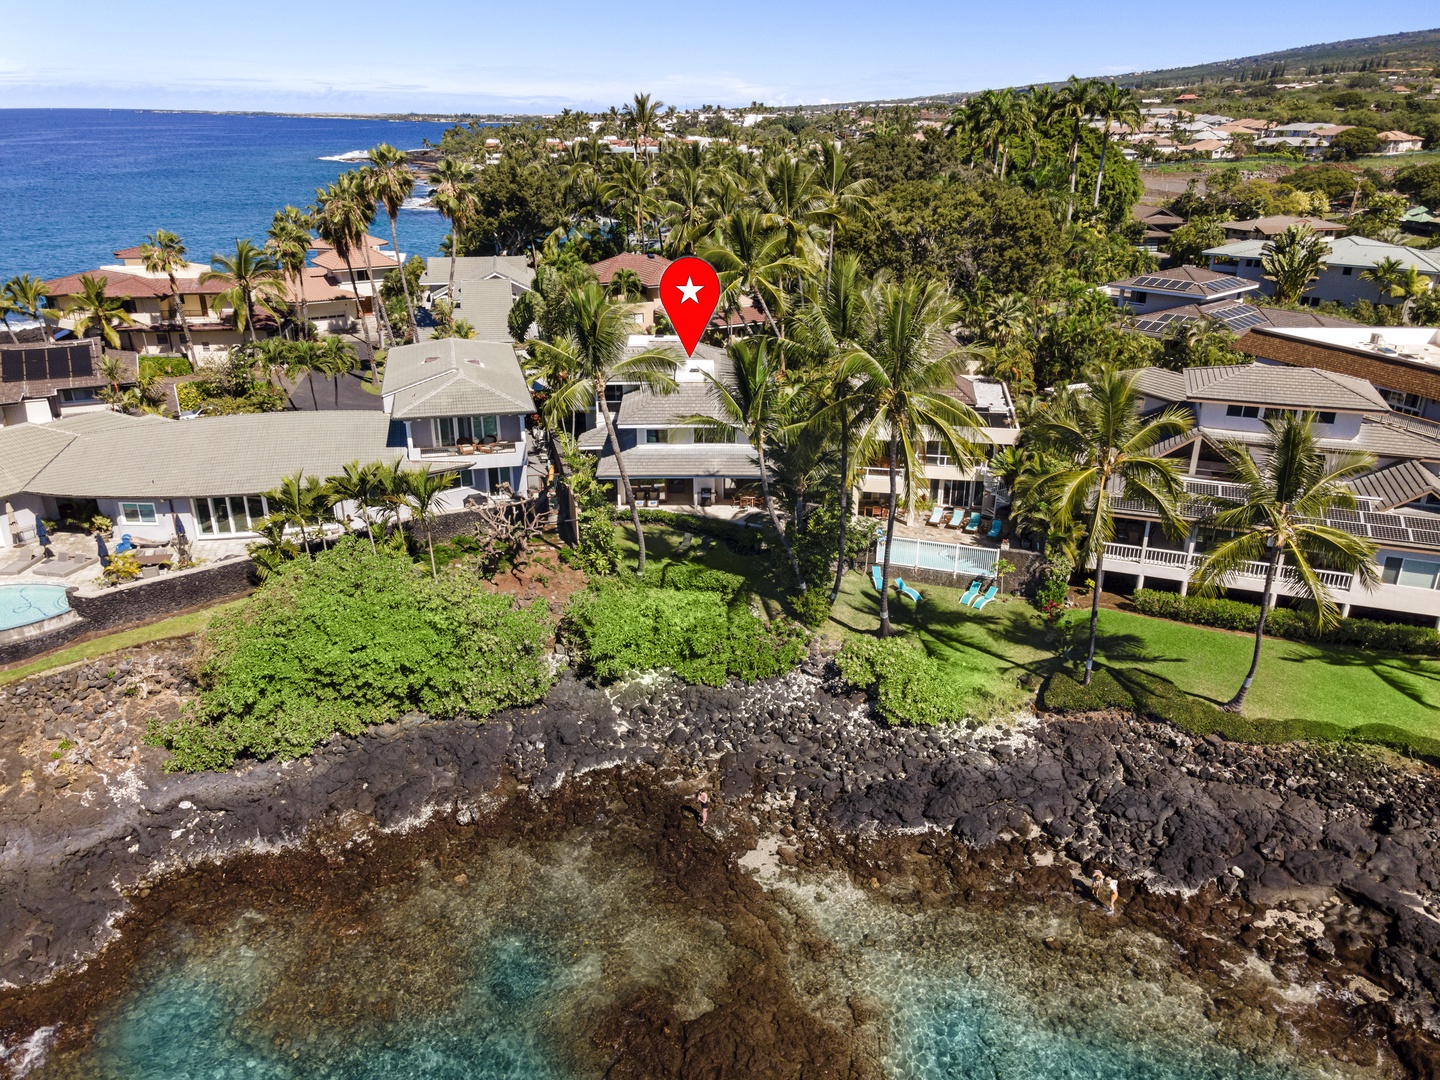 Kailua Kona Vacation Rentals, Ali'i Point #7 - This vacation rental is a short walk to a nearby sandy beach and just minutes away from grocery stores, shopping, restaurants, and ocean activities.